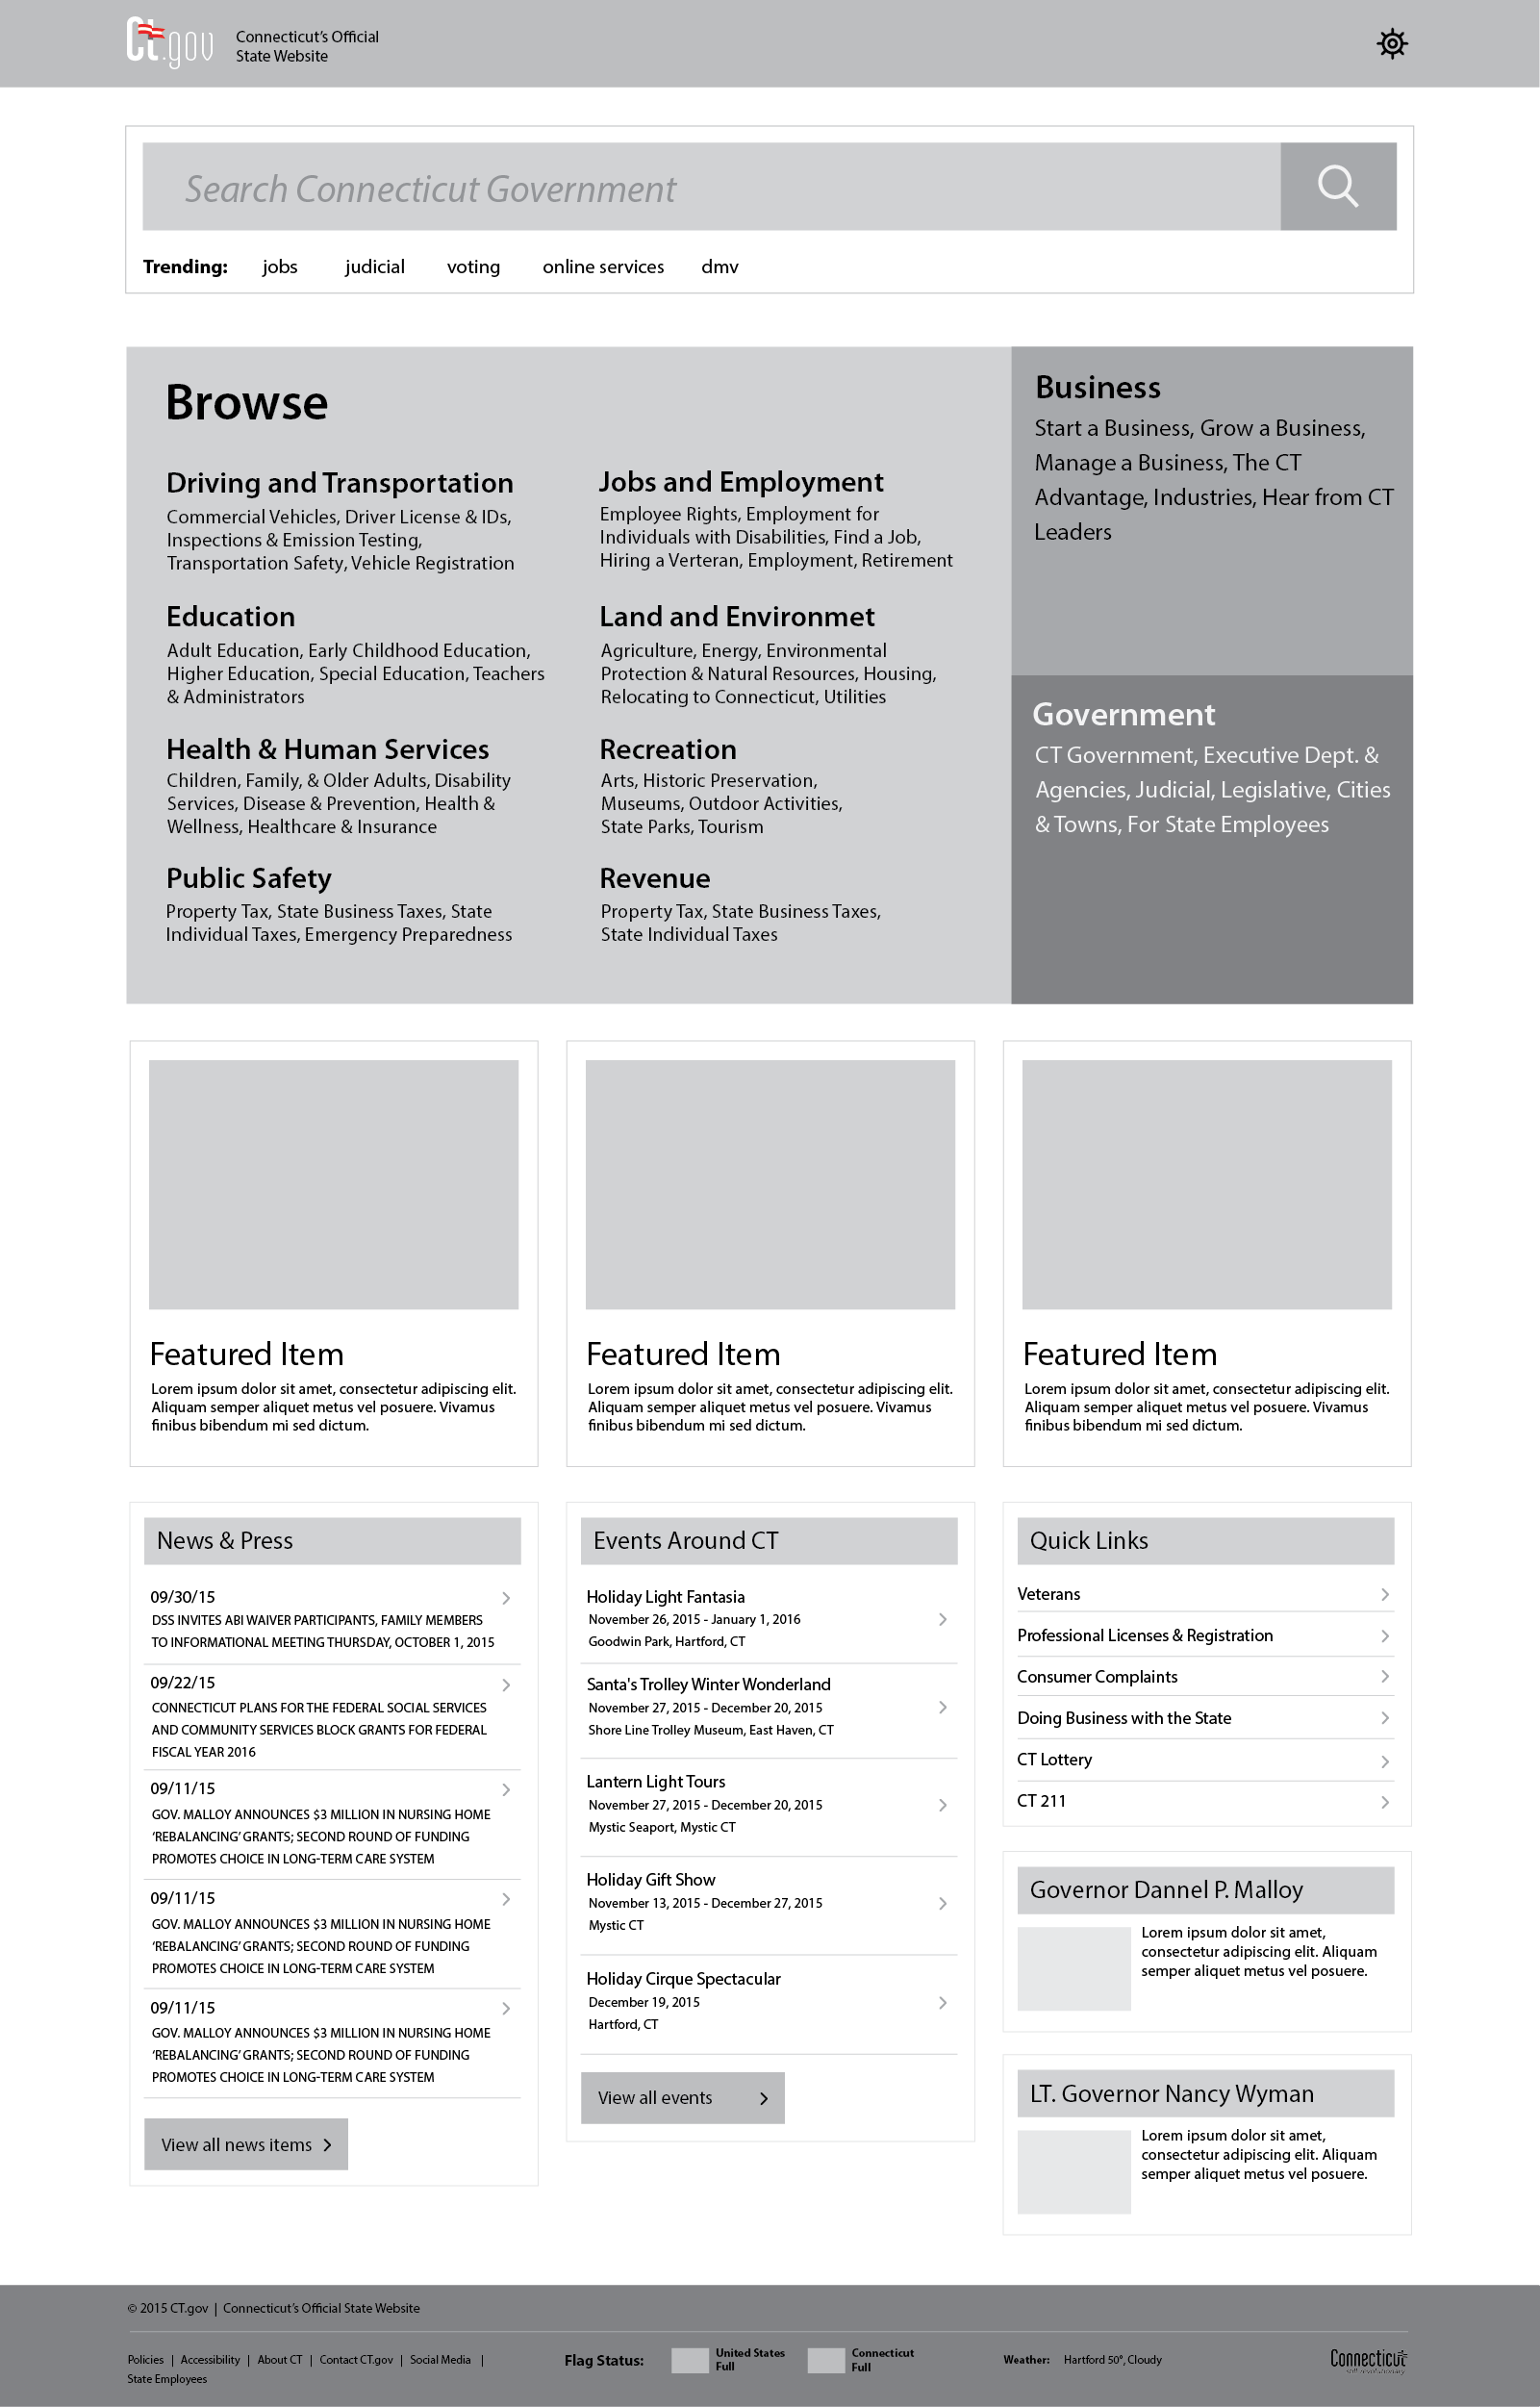 Wireframe of new home page